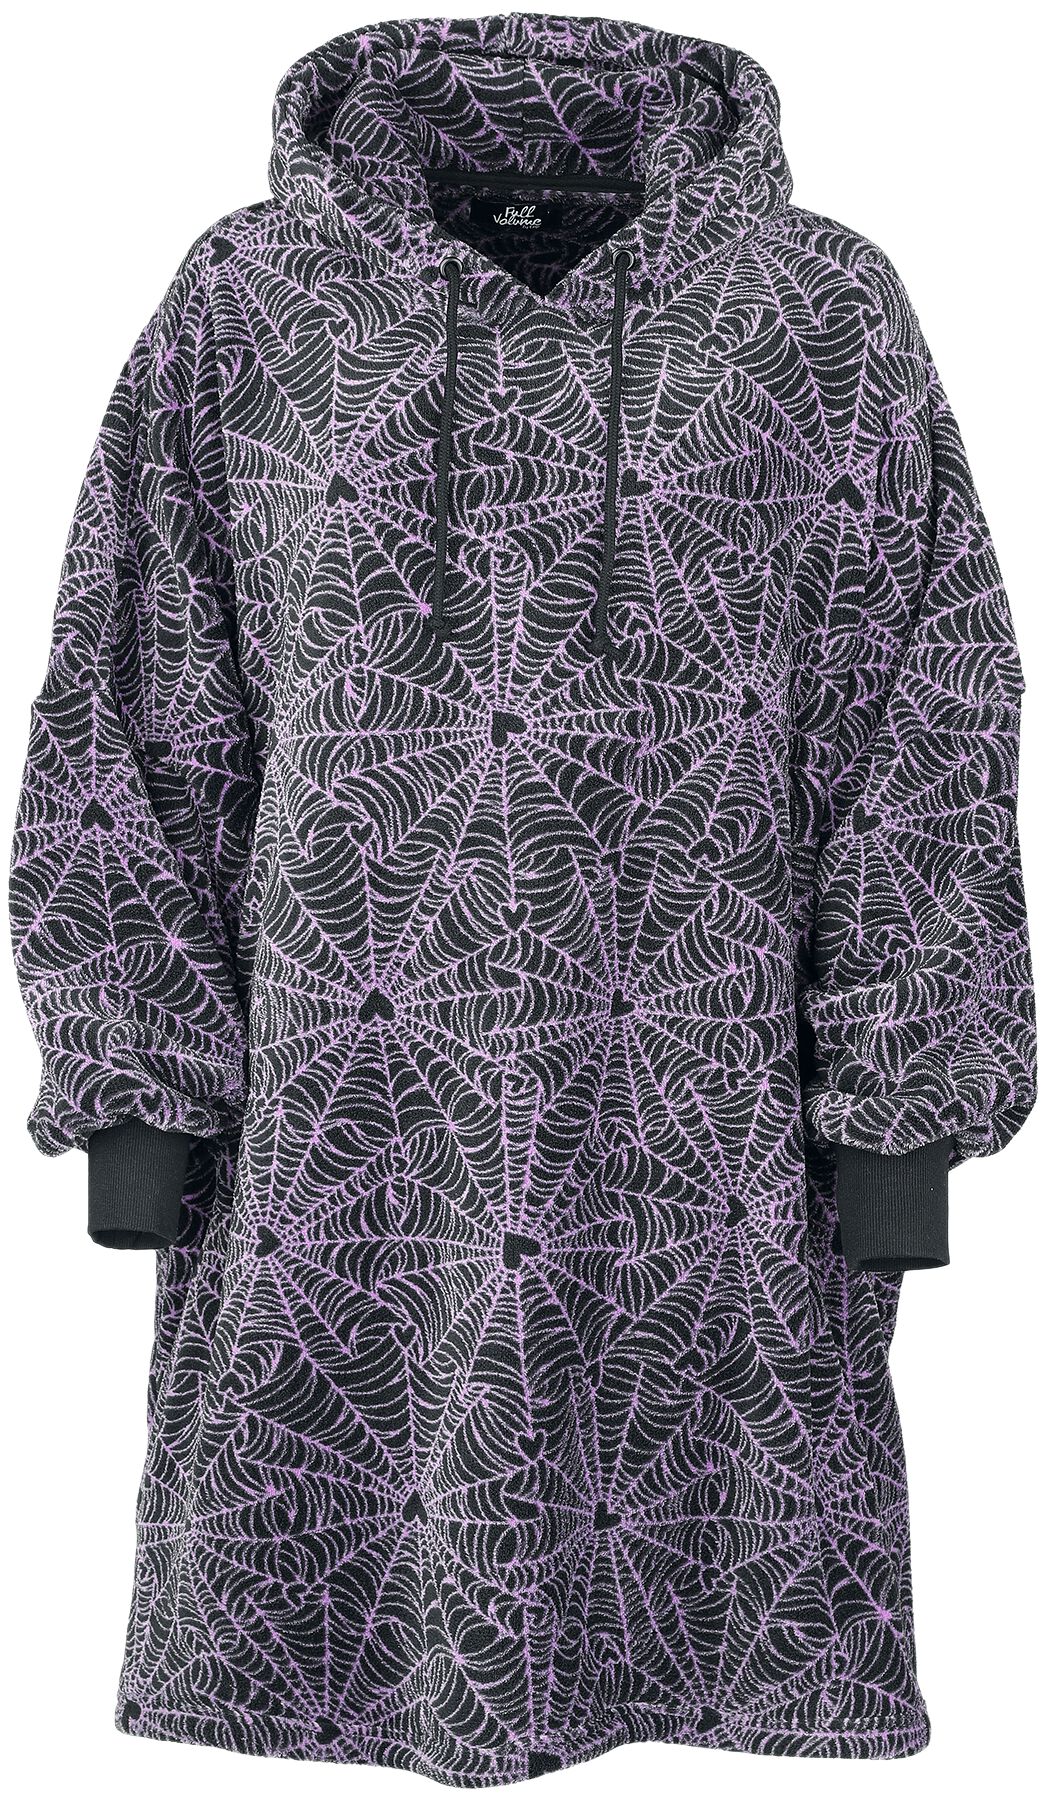 Full Volume by EMP Fleecy hoodie with spider-web print Hooded sweater black pink